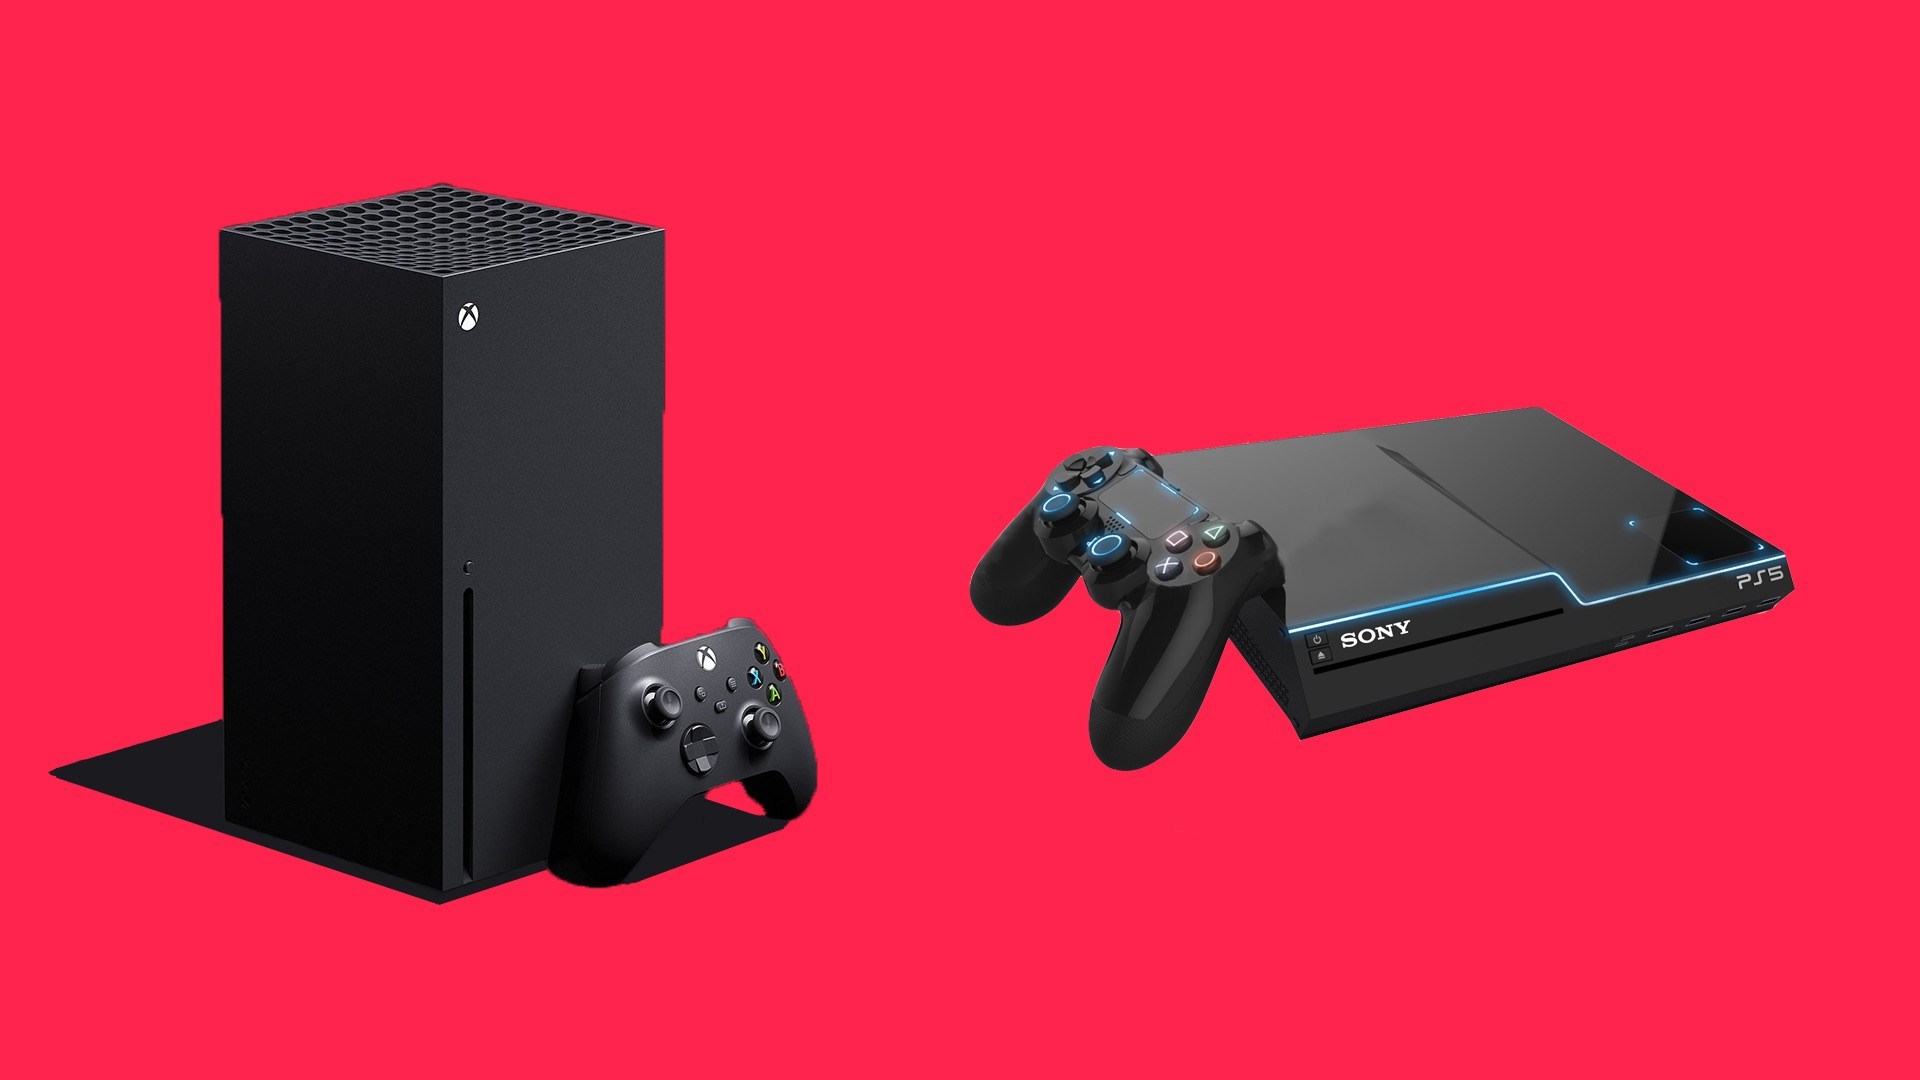 Launch Date of PS5 and Xbox Series X to be Delayed